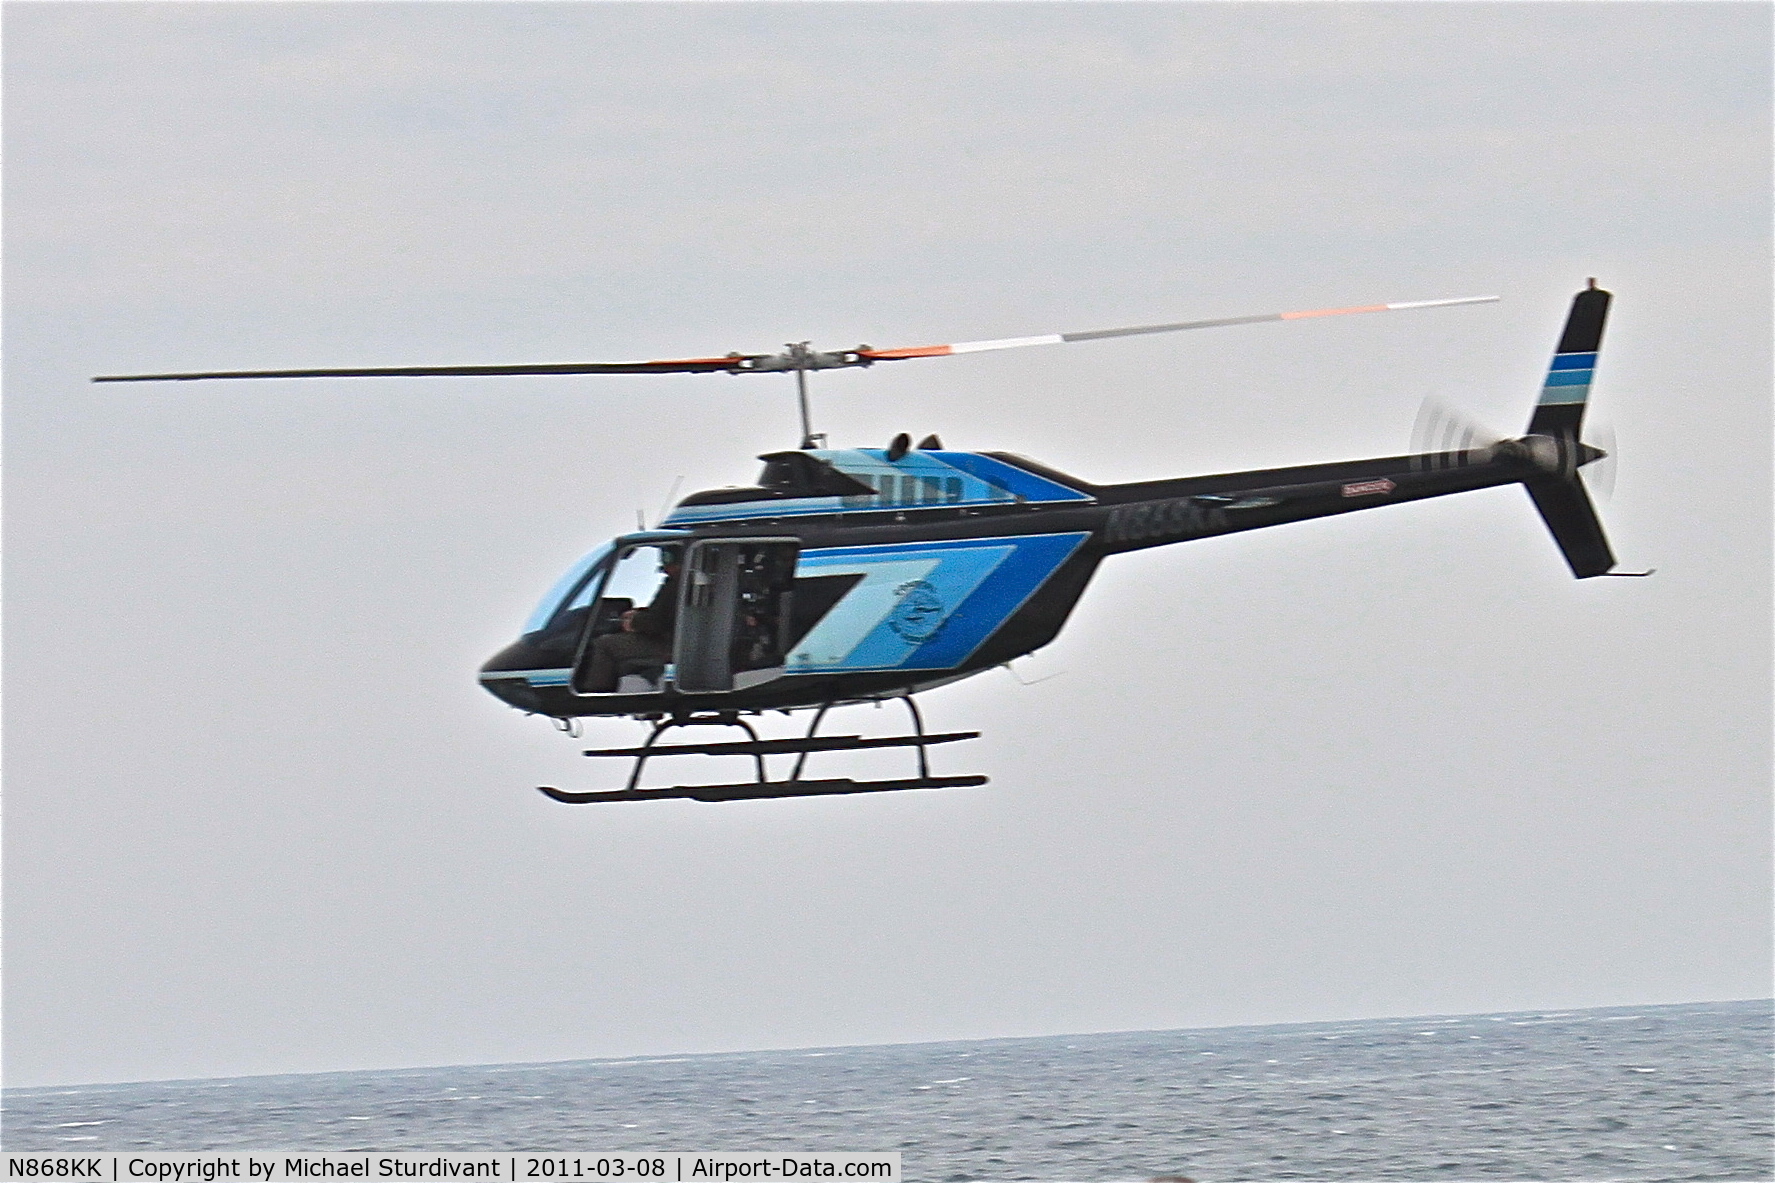 N868KK, 1976 Bell 206B JetRanger C/N 2031, This helicopter circled my area for 15 minutes today.  I went down to the beach to see what was going on and found it hovering at the waters edge and below the height of the dunes.  It the flew East along the coast.